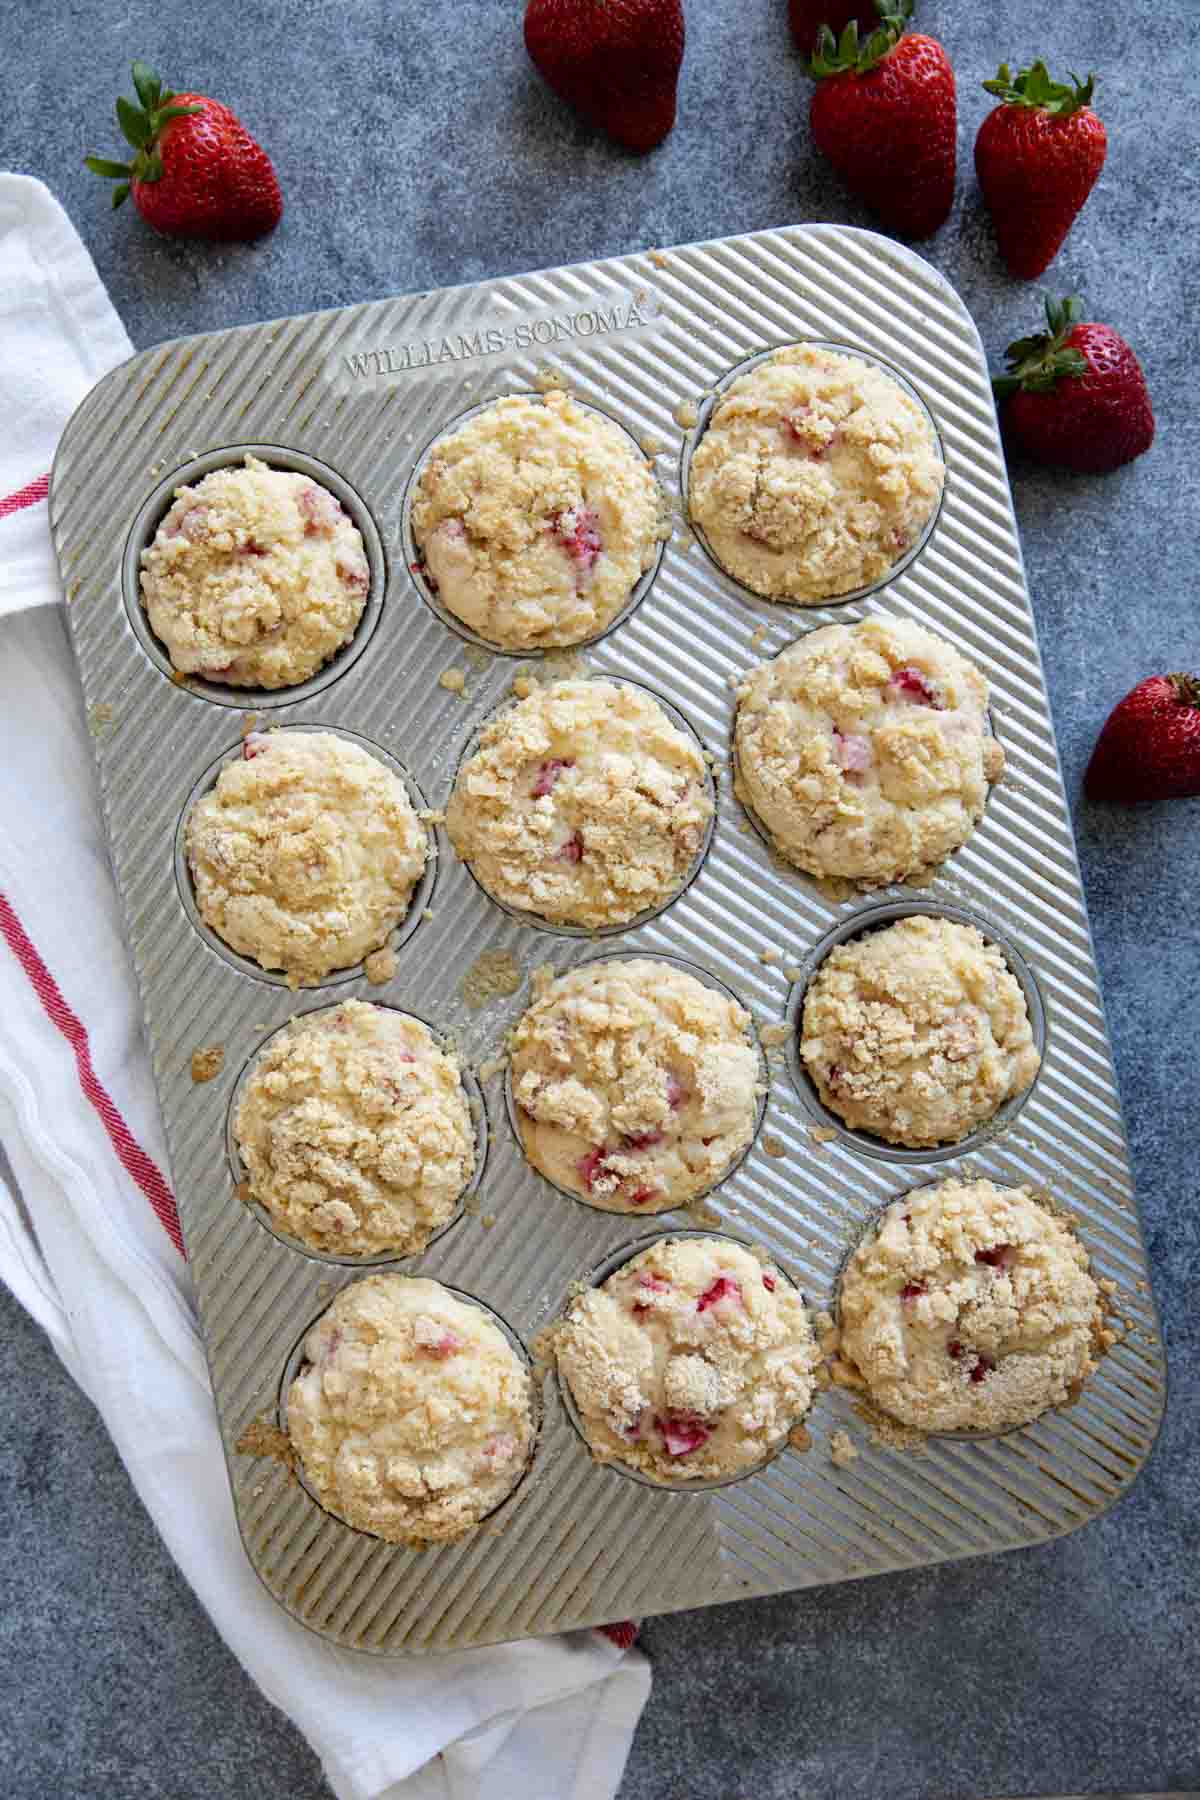 Strawberry muffins in a muffin tin with a white towel.